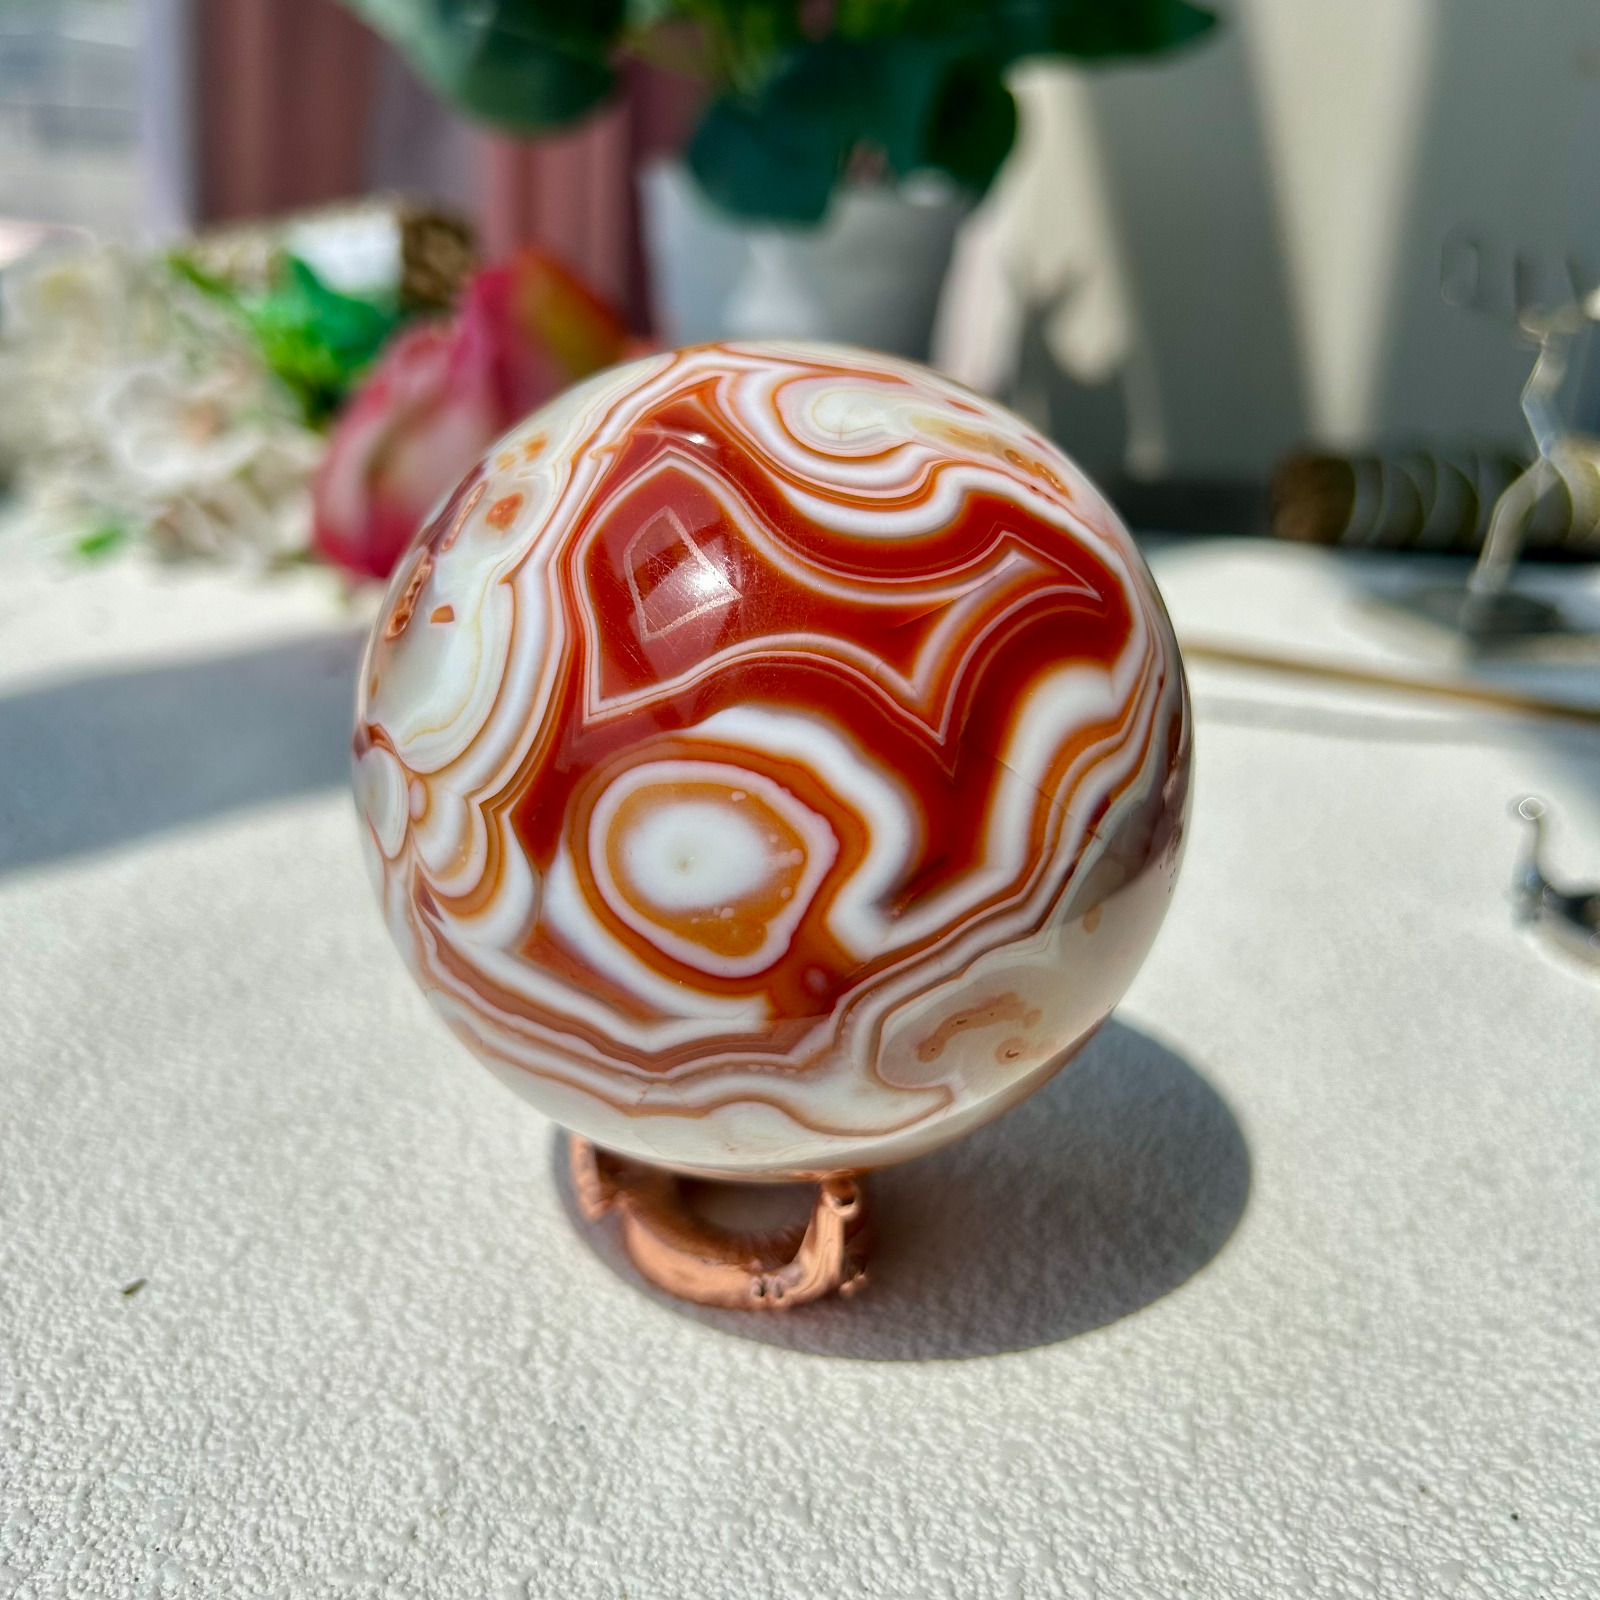 670g Banded Agate Round Eye Red Carnelian Quartz Crystal Sphere 79mm 1th